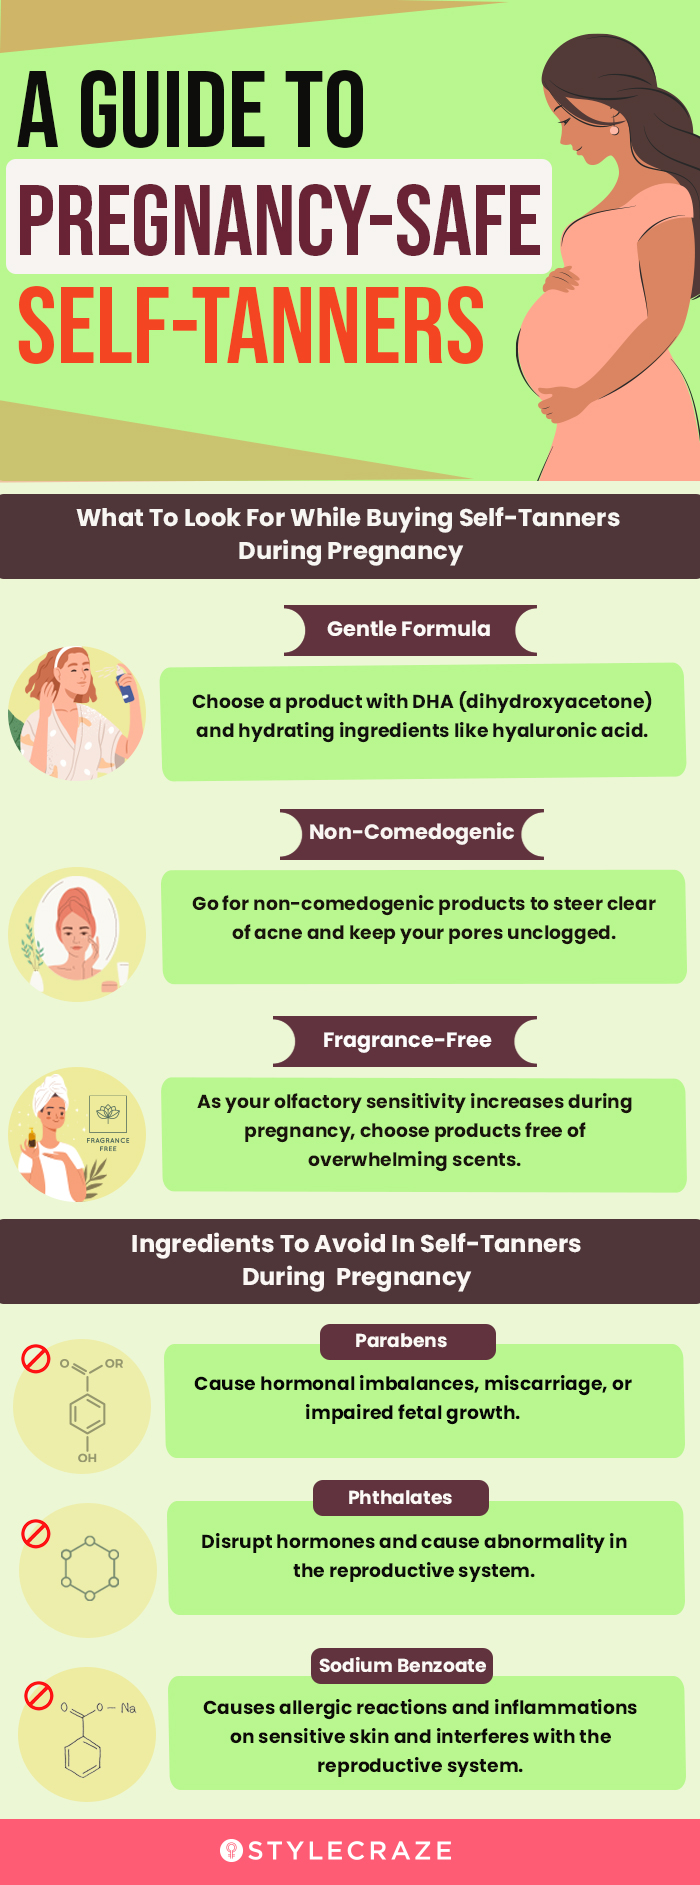 A Guide To Pregnancy-Safe Self-Tanners [infographic]